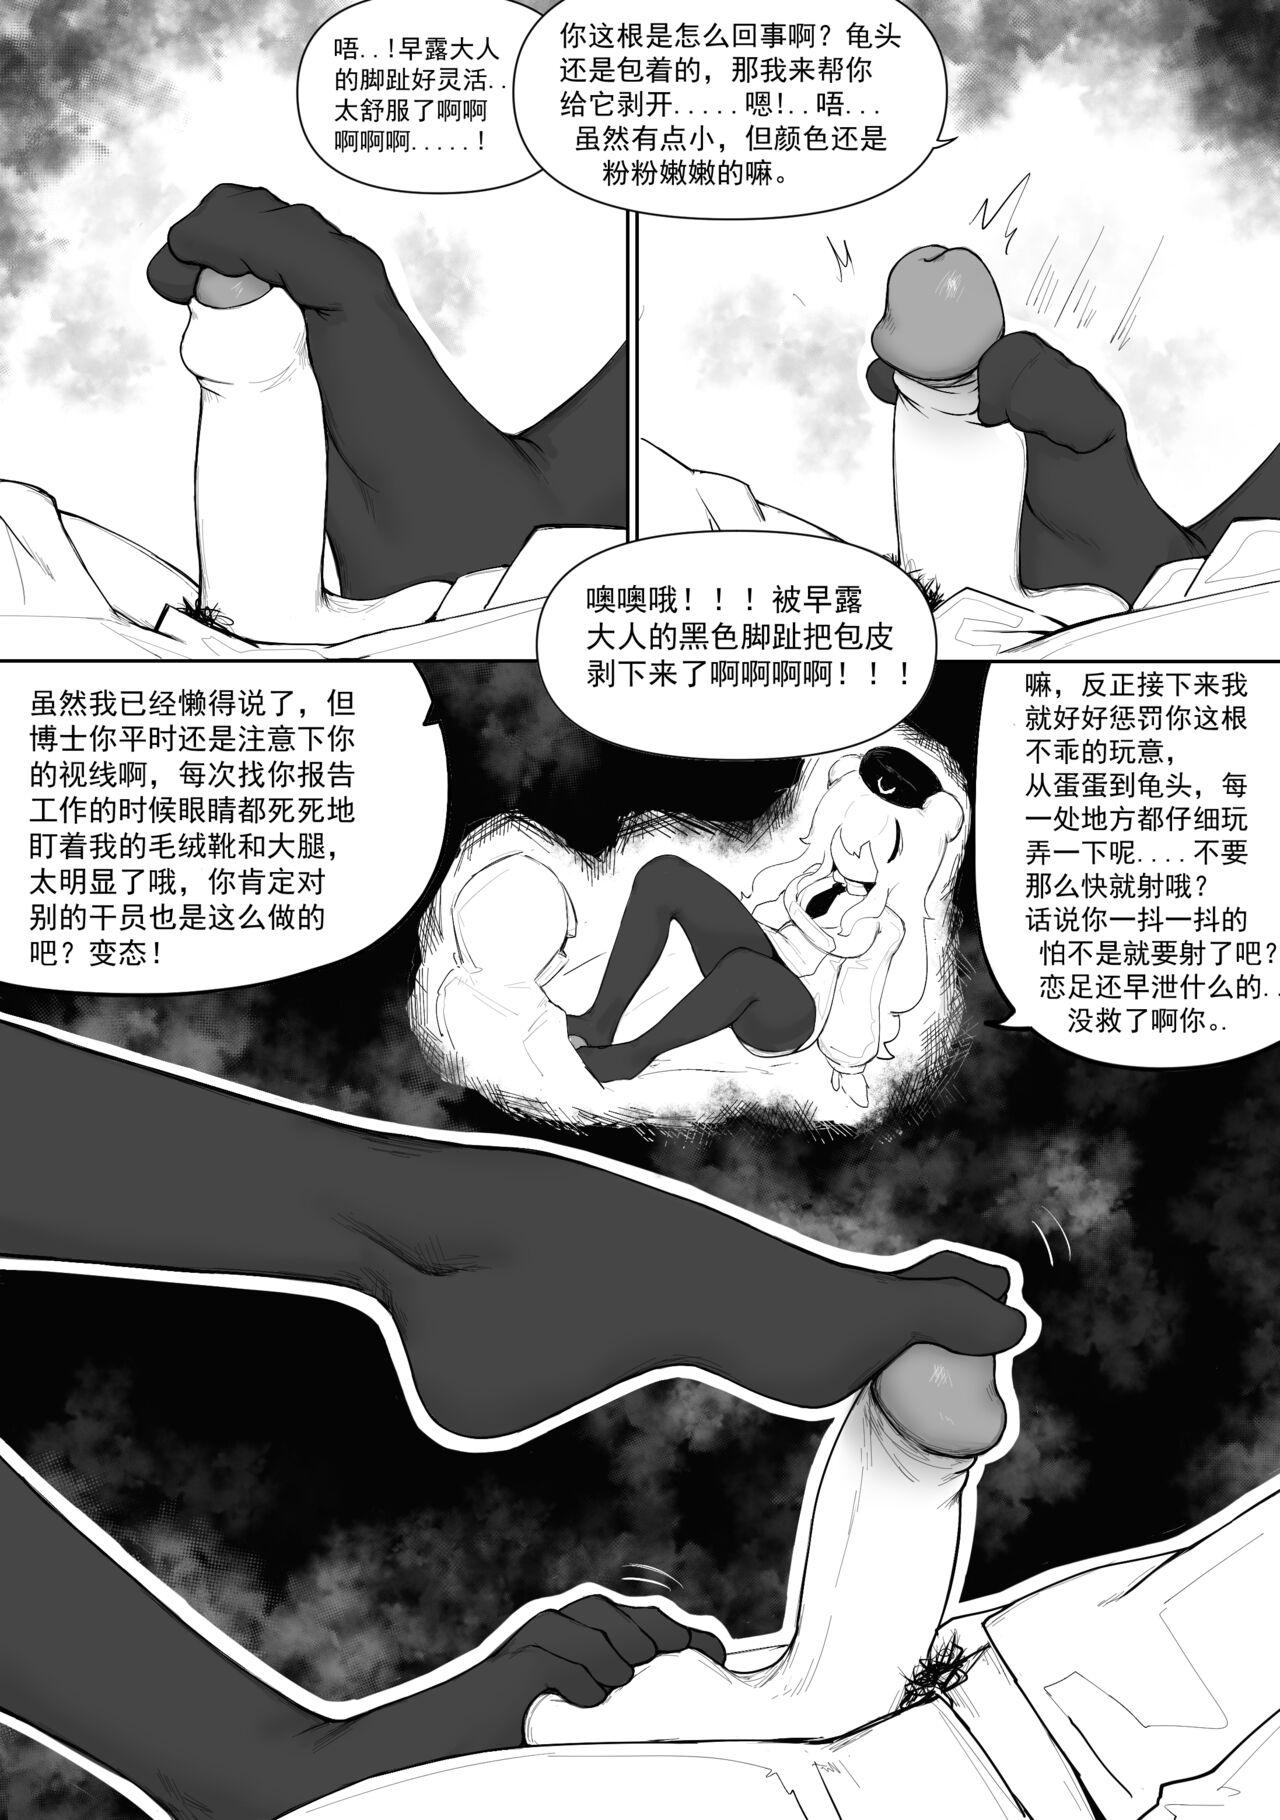 Casting 澄澈之冰 早露 - Arknights Amateur Sex - Page 5